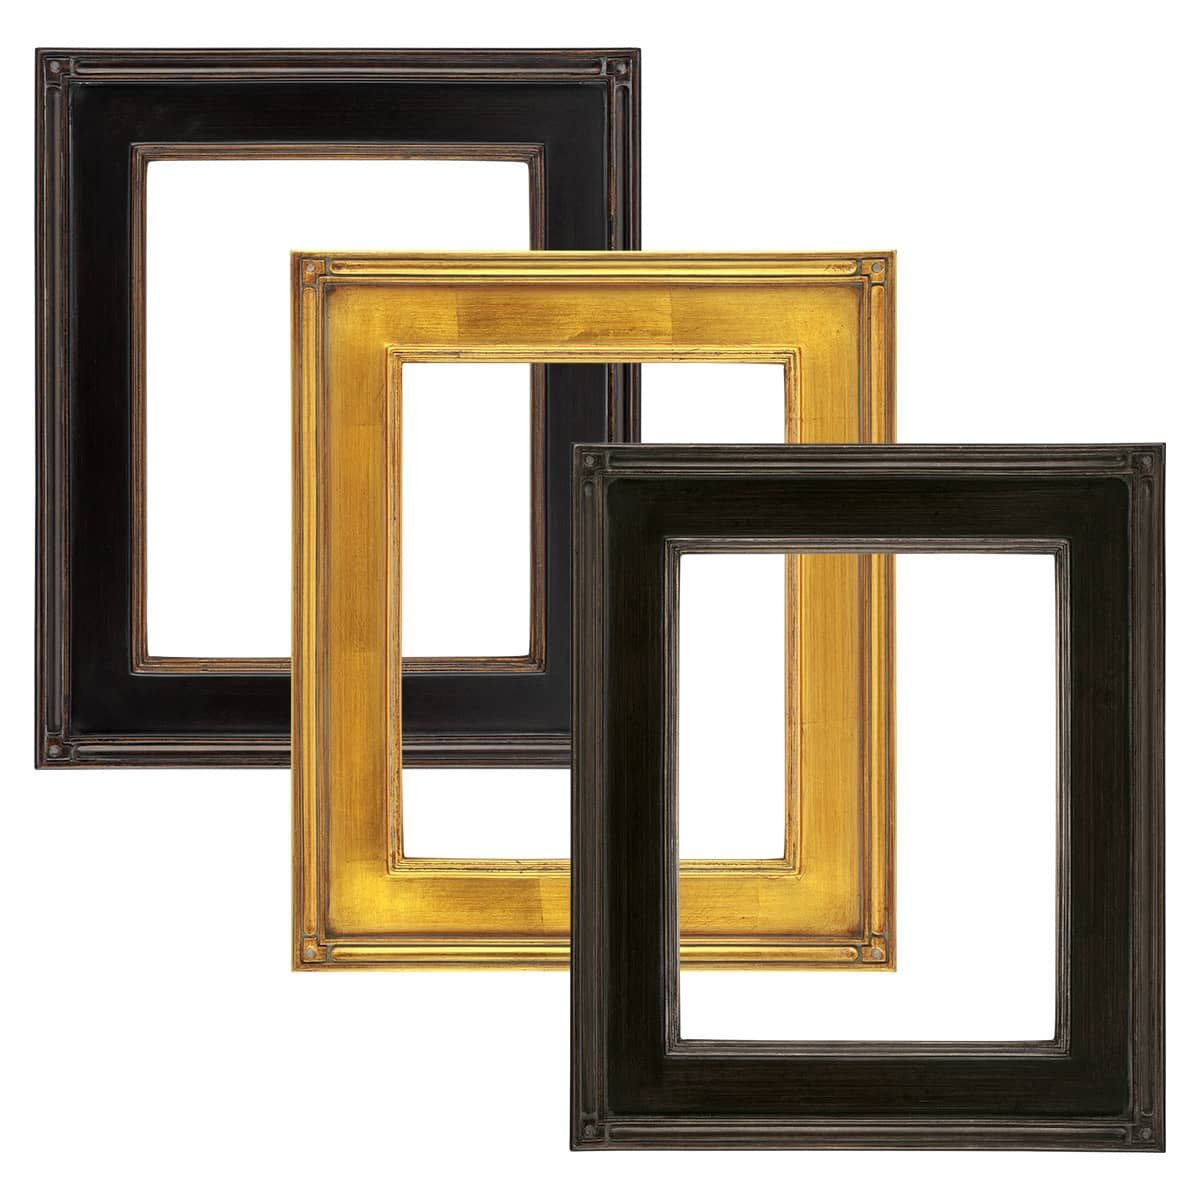 Hand-Leafed Museum-Quality Closed Corner Frames!